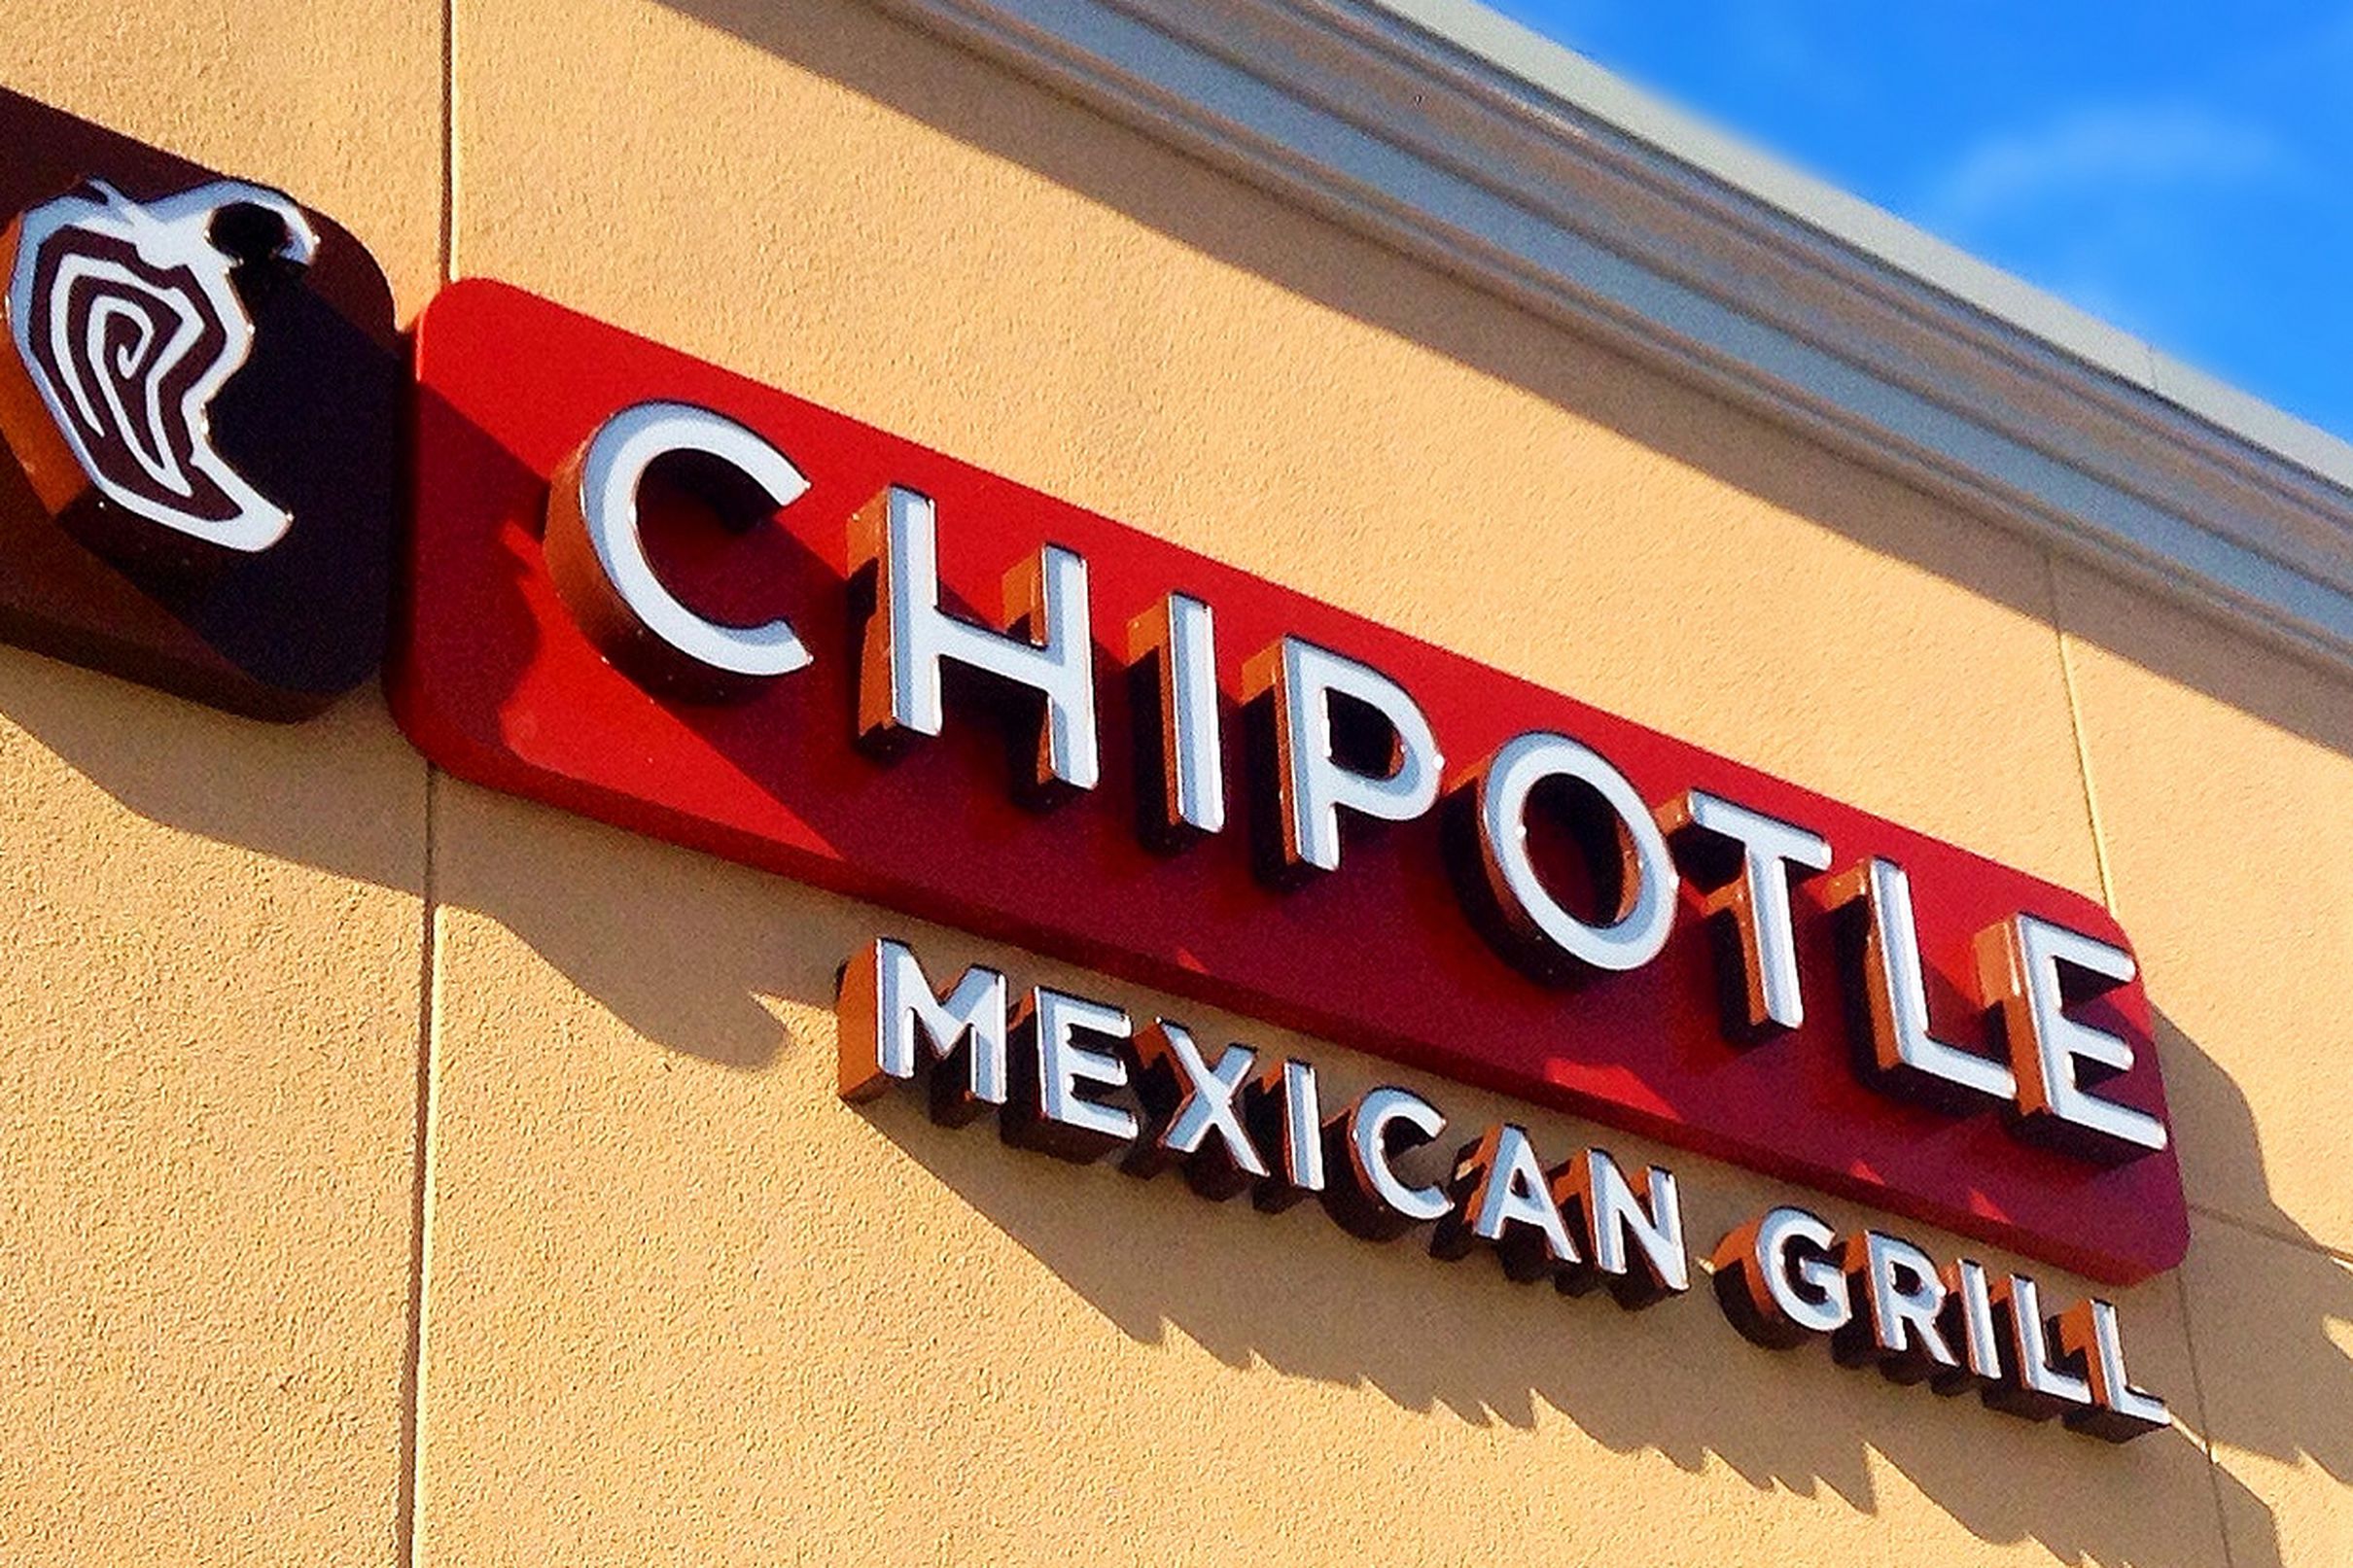 Seattle Area Chipotle Closed Once Again for Health Violations - Eater